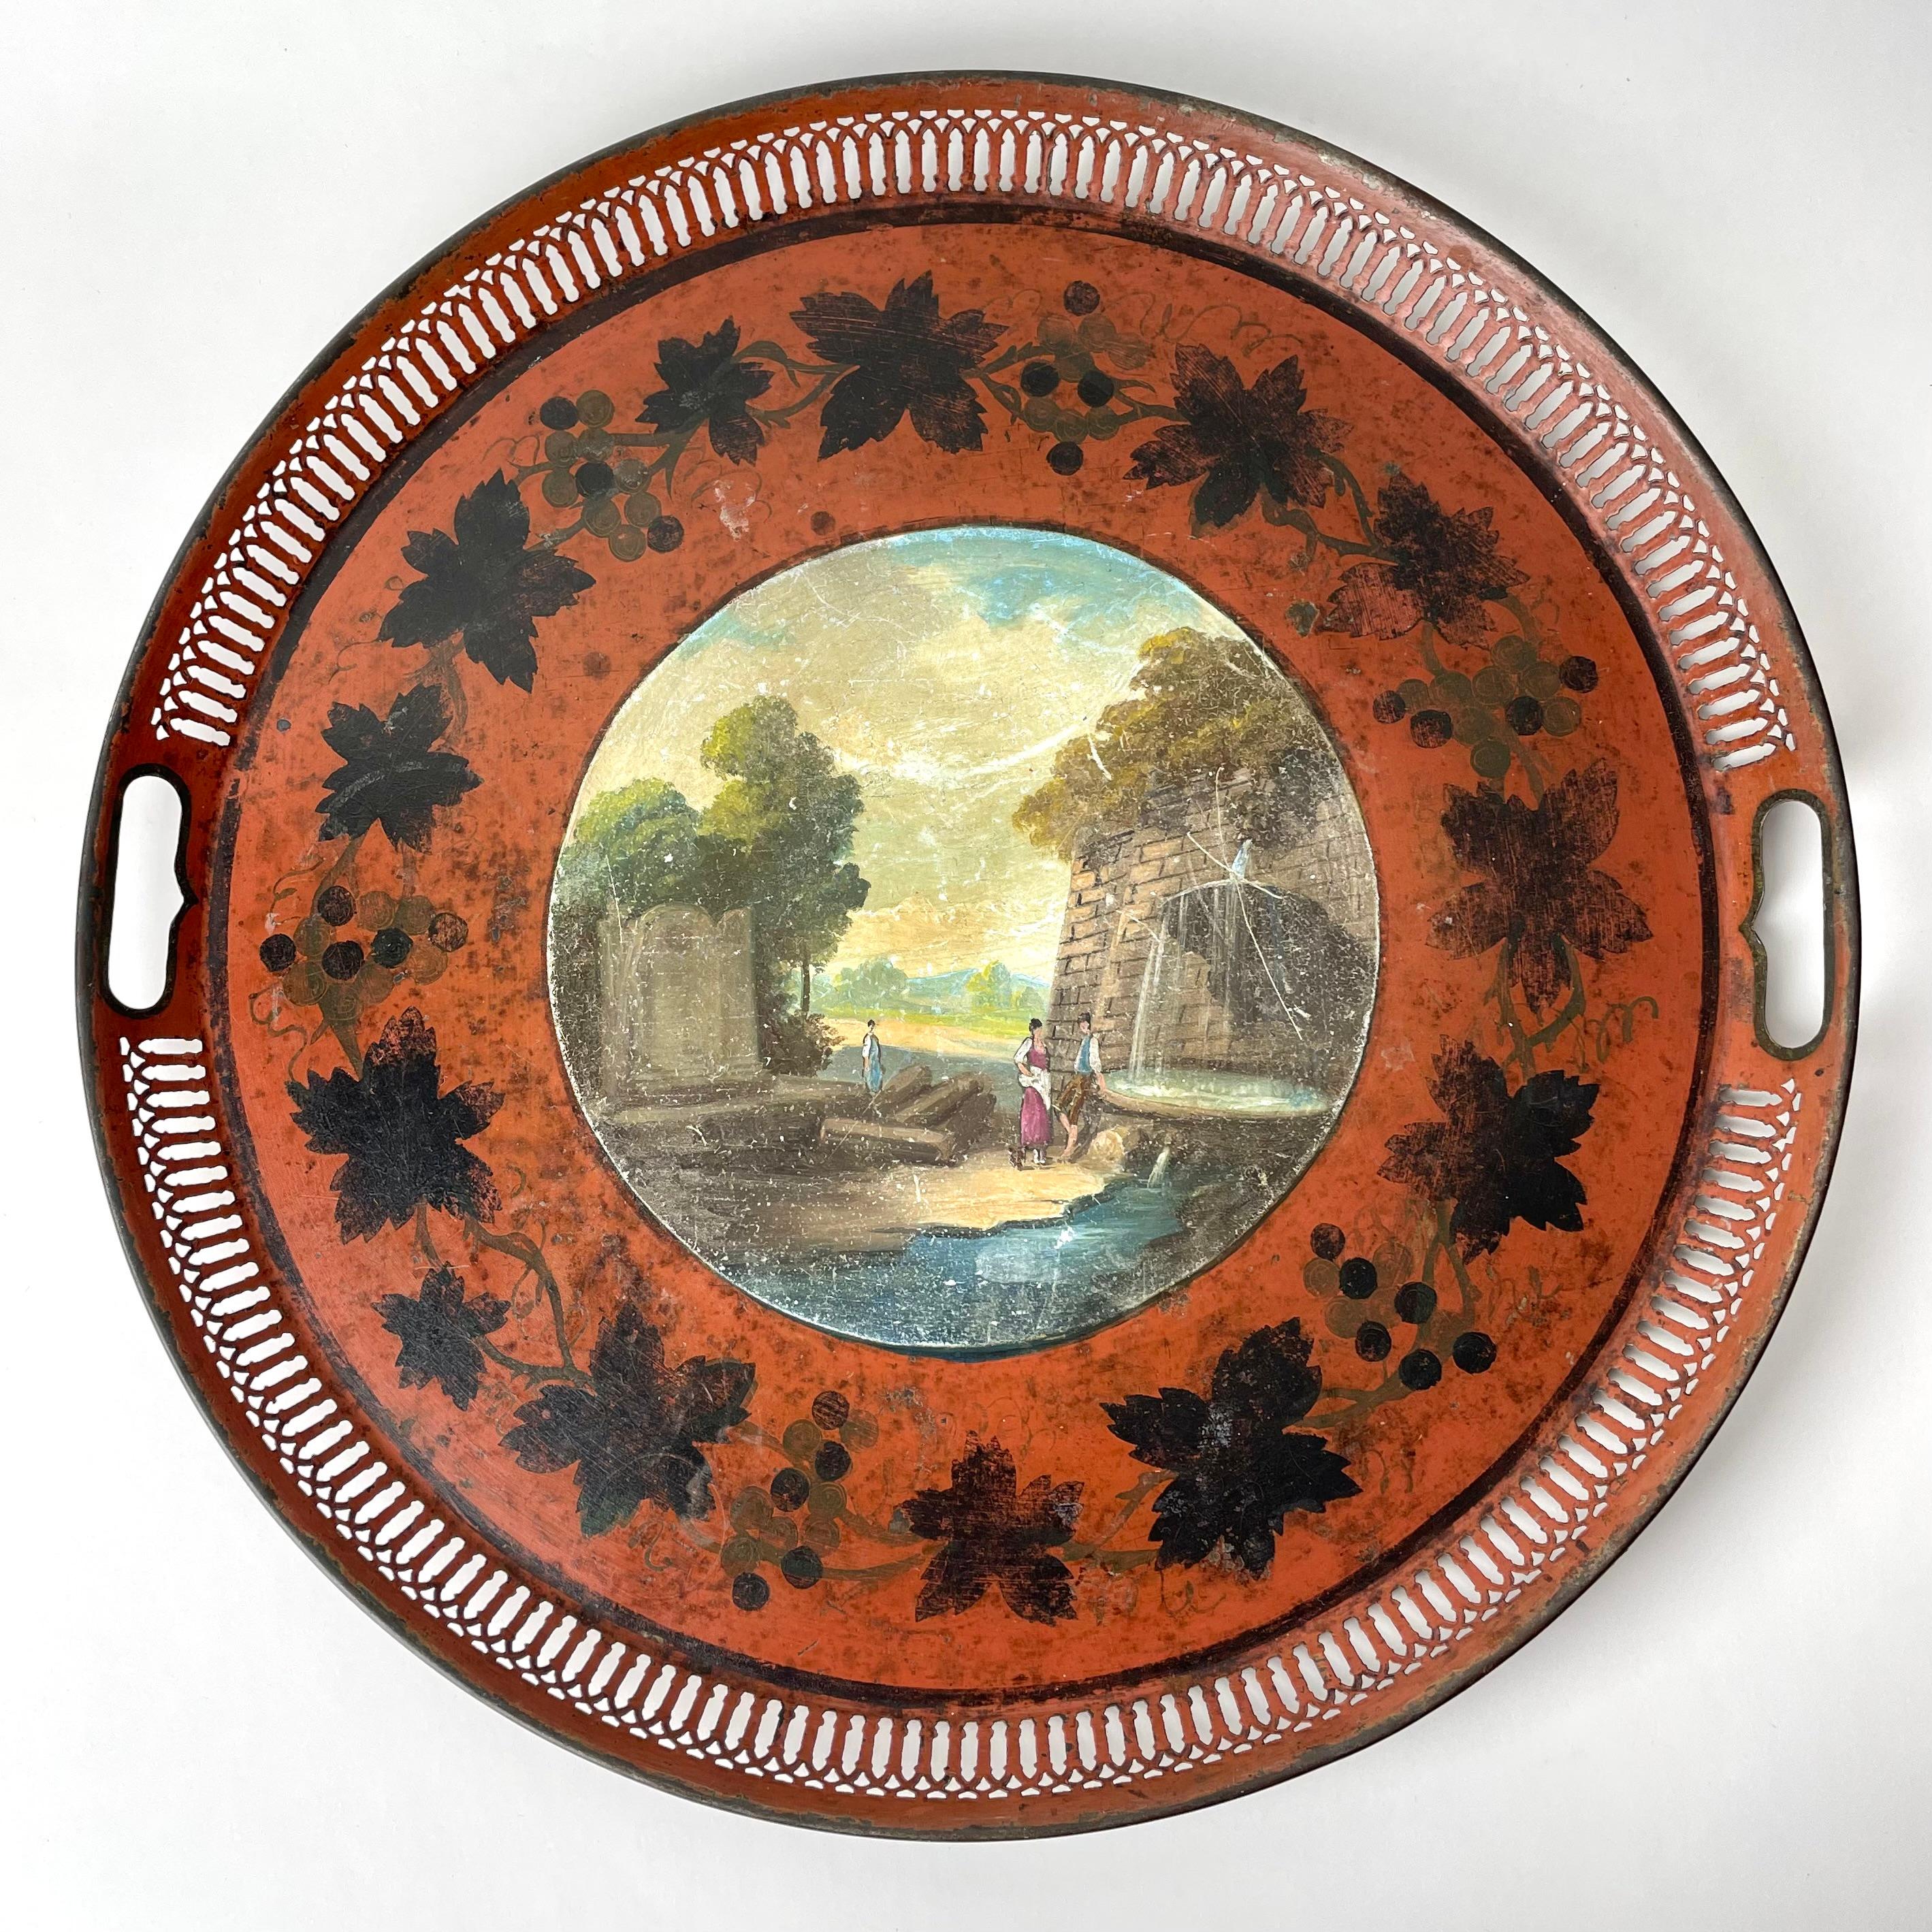 Beautifully handpainted tray in sheet metal with much patina from early 19th Century. Decorated with leaves and classic exterior from Italy or France.

Wear consistent with age and use 